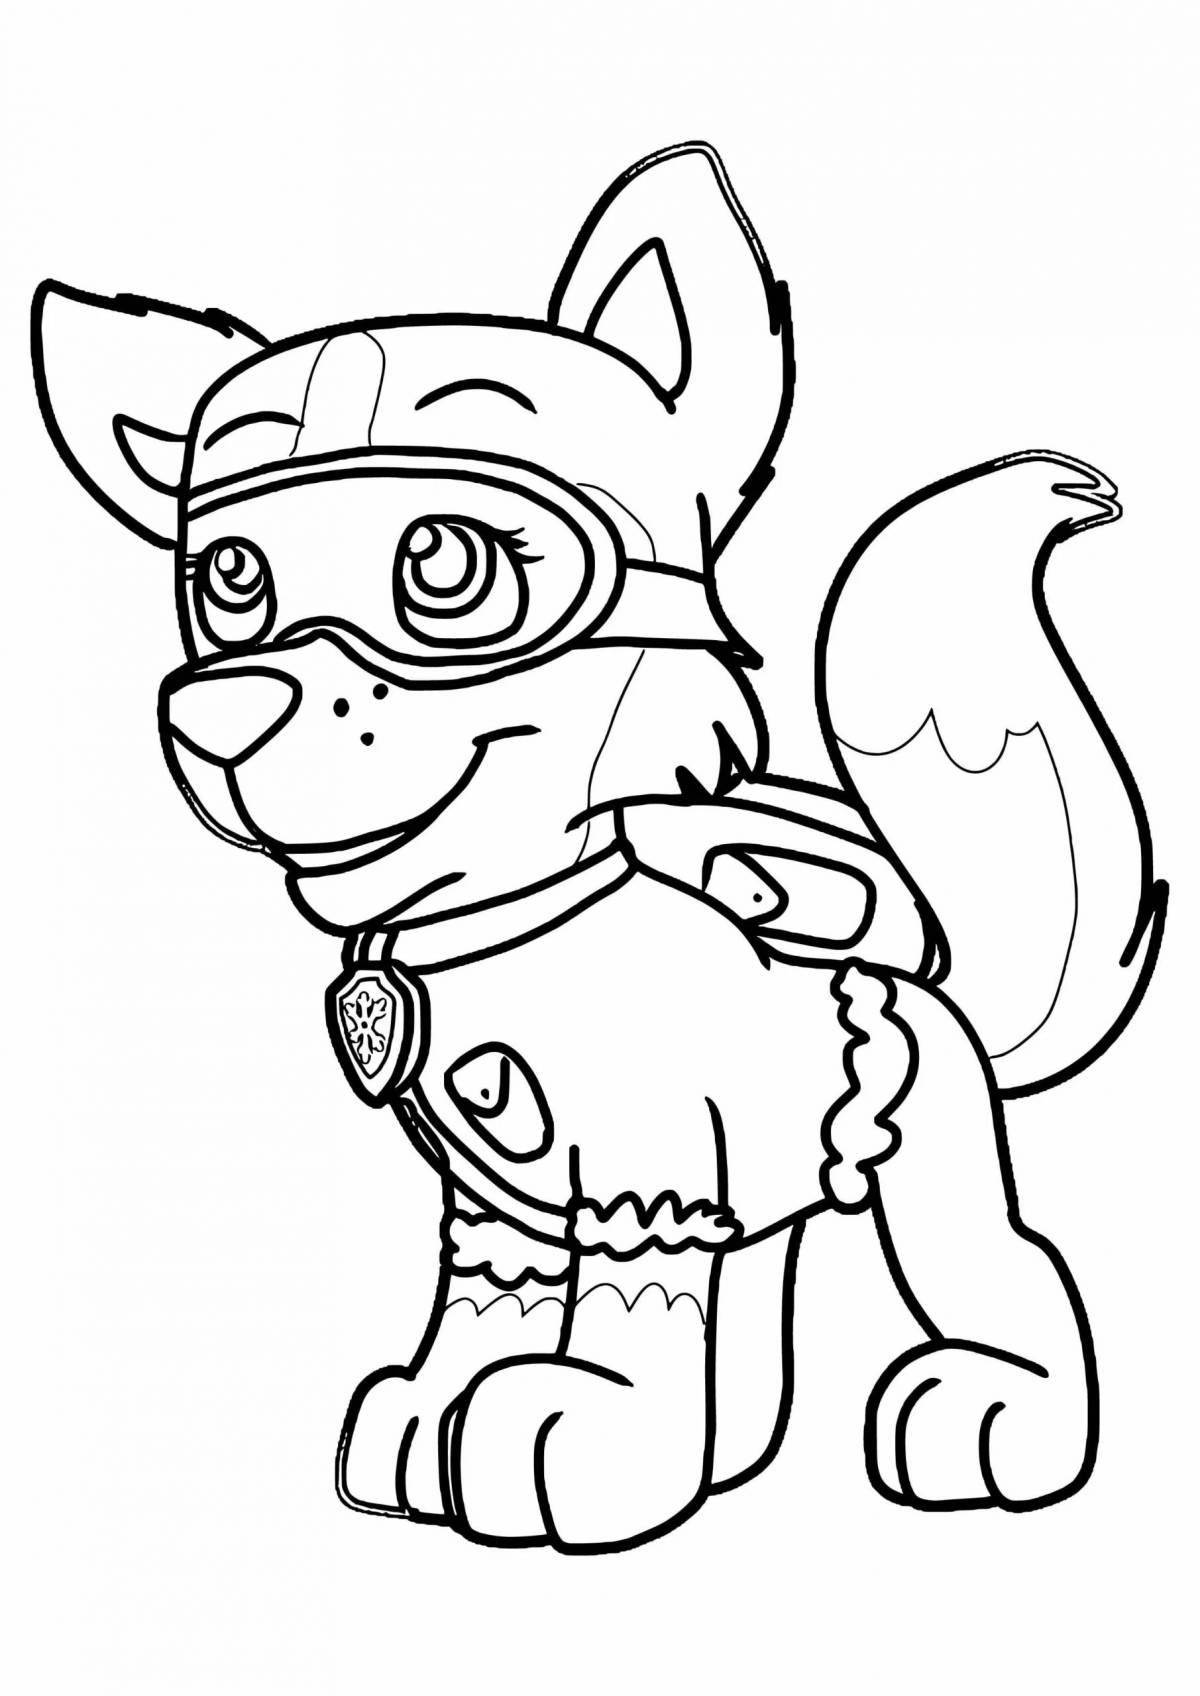 Coloring page of happy cute paw patrol